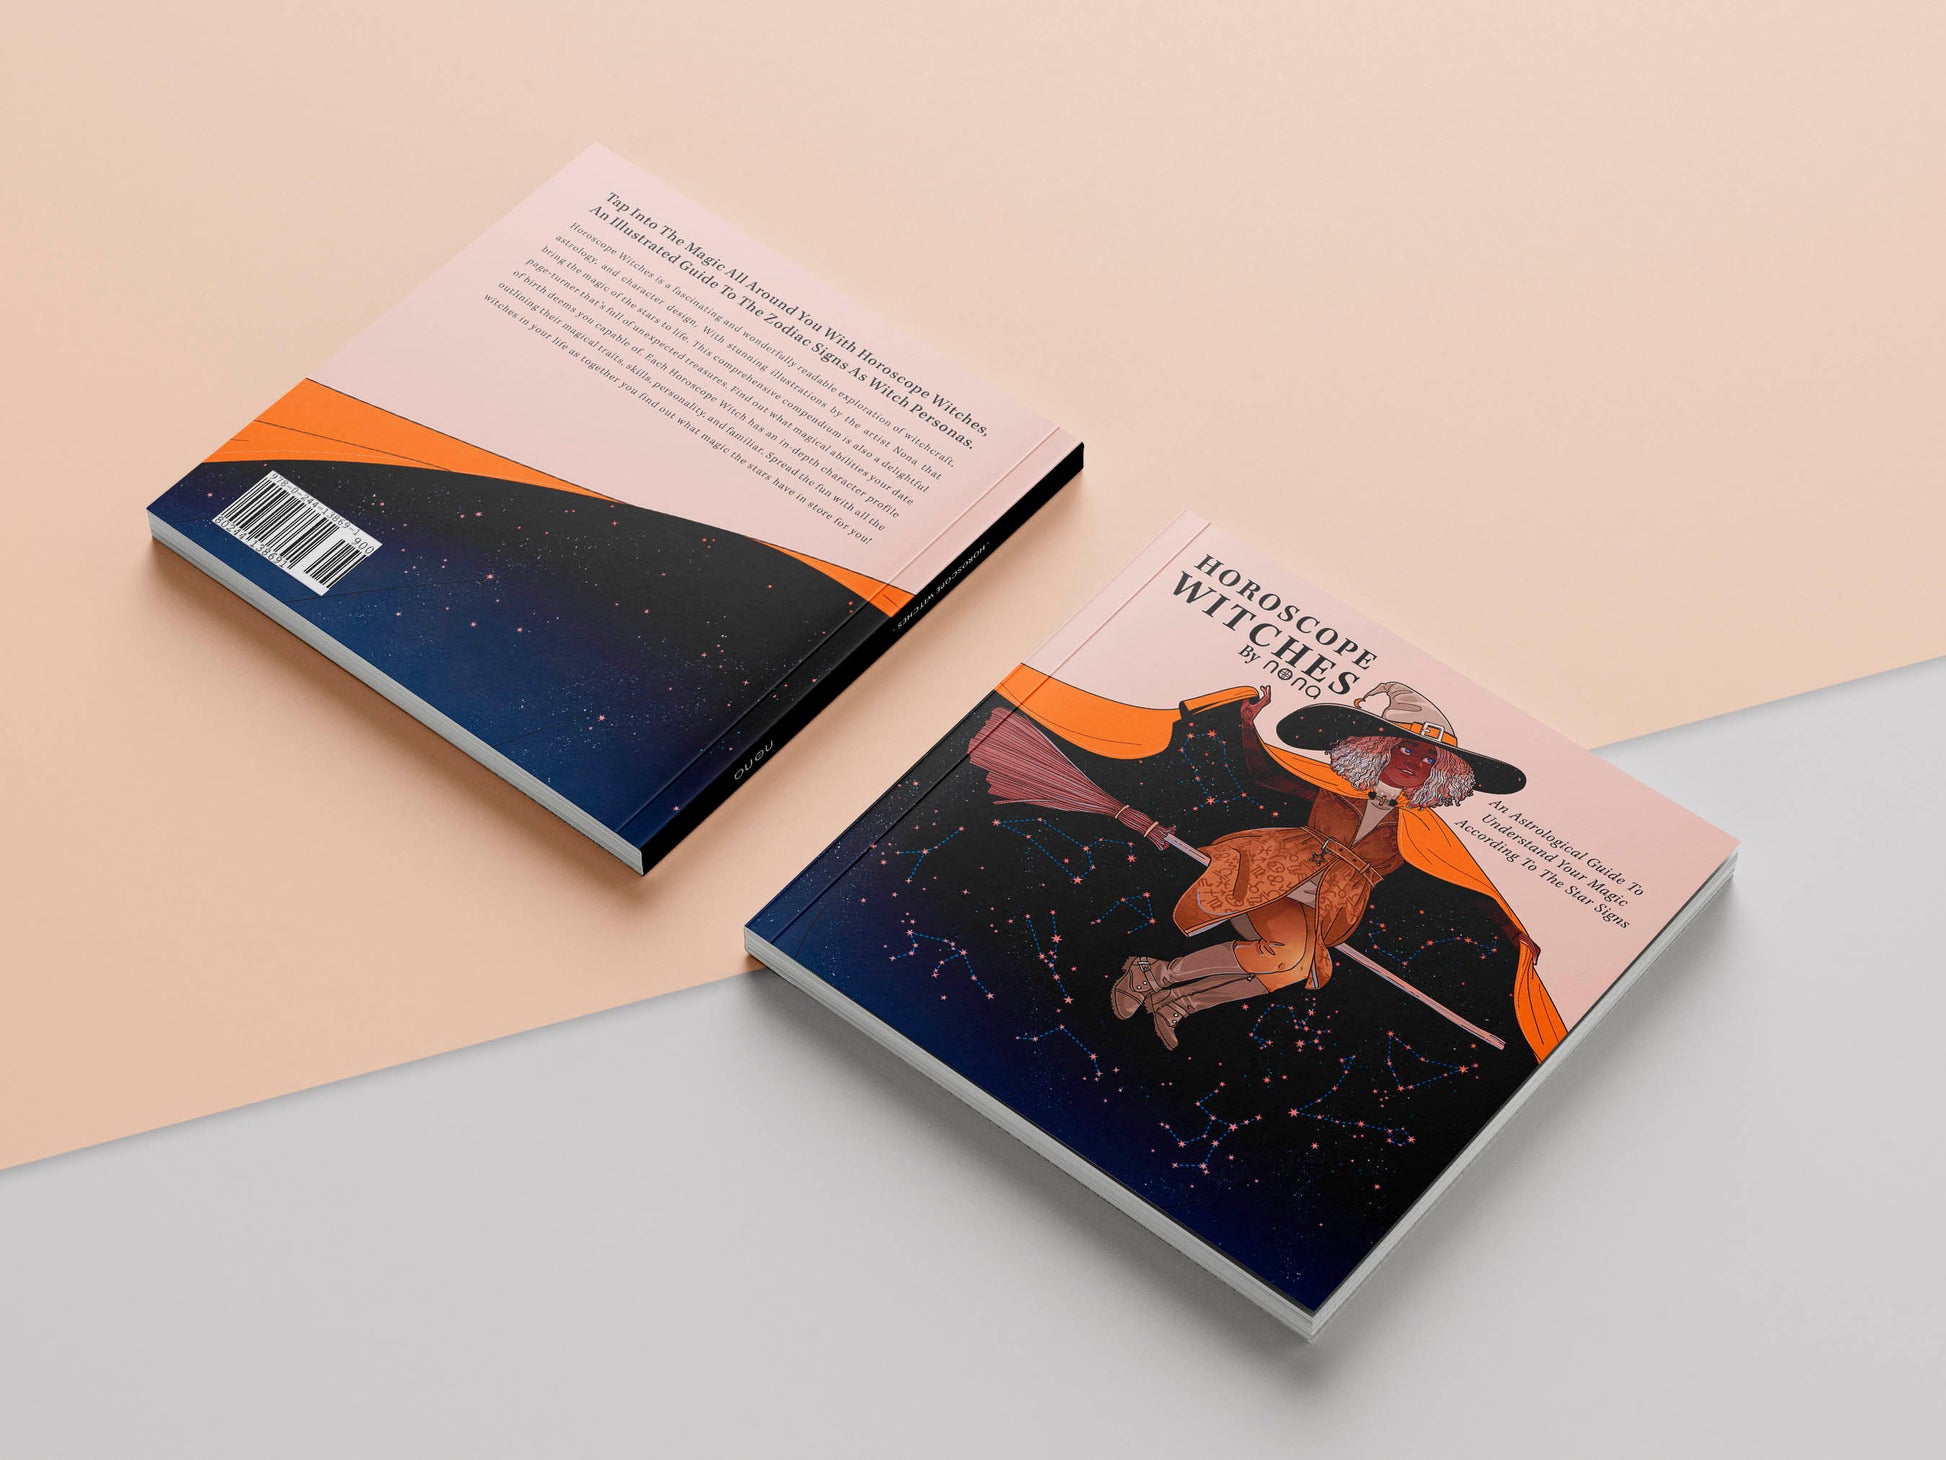 Book front and back cover of a witch flying on a broomstick with her cape flowing behind filled with the night sky zodiac consolations the title Horoscope Witches by nona, An astrological guide to understand your magic according to the star signs. 